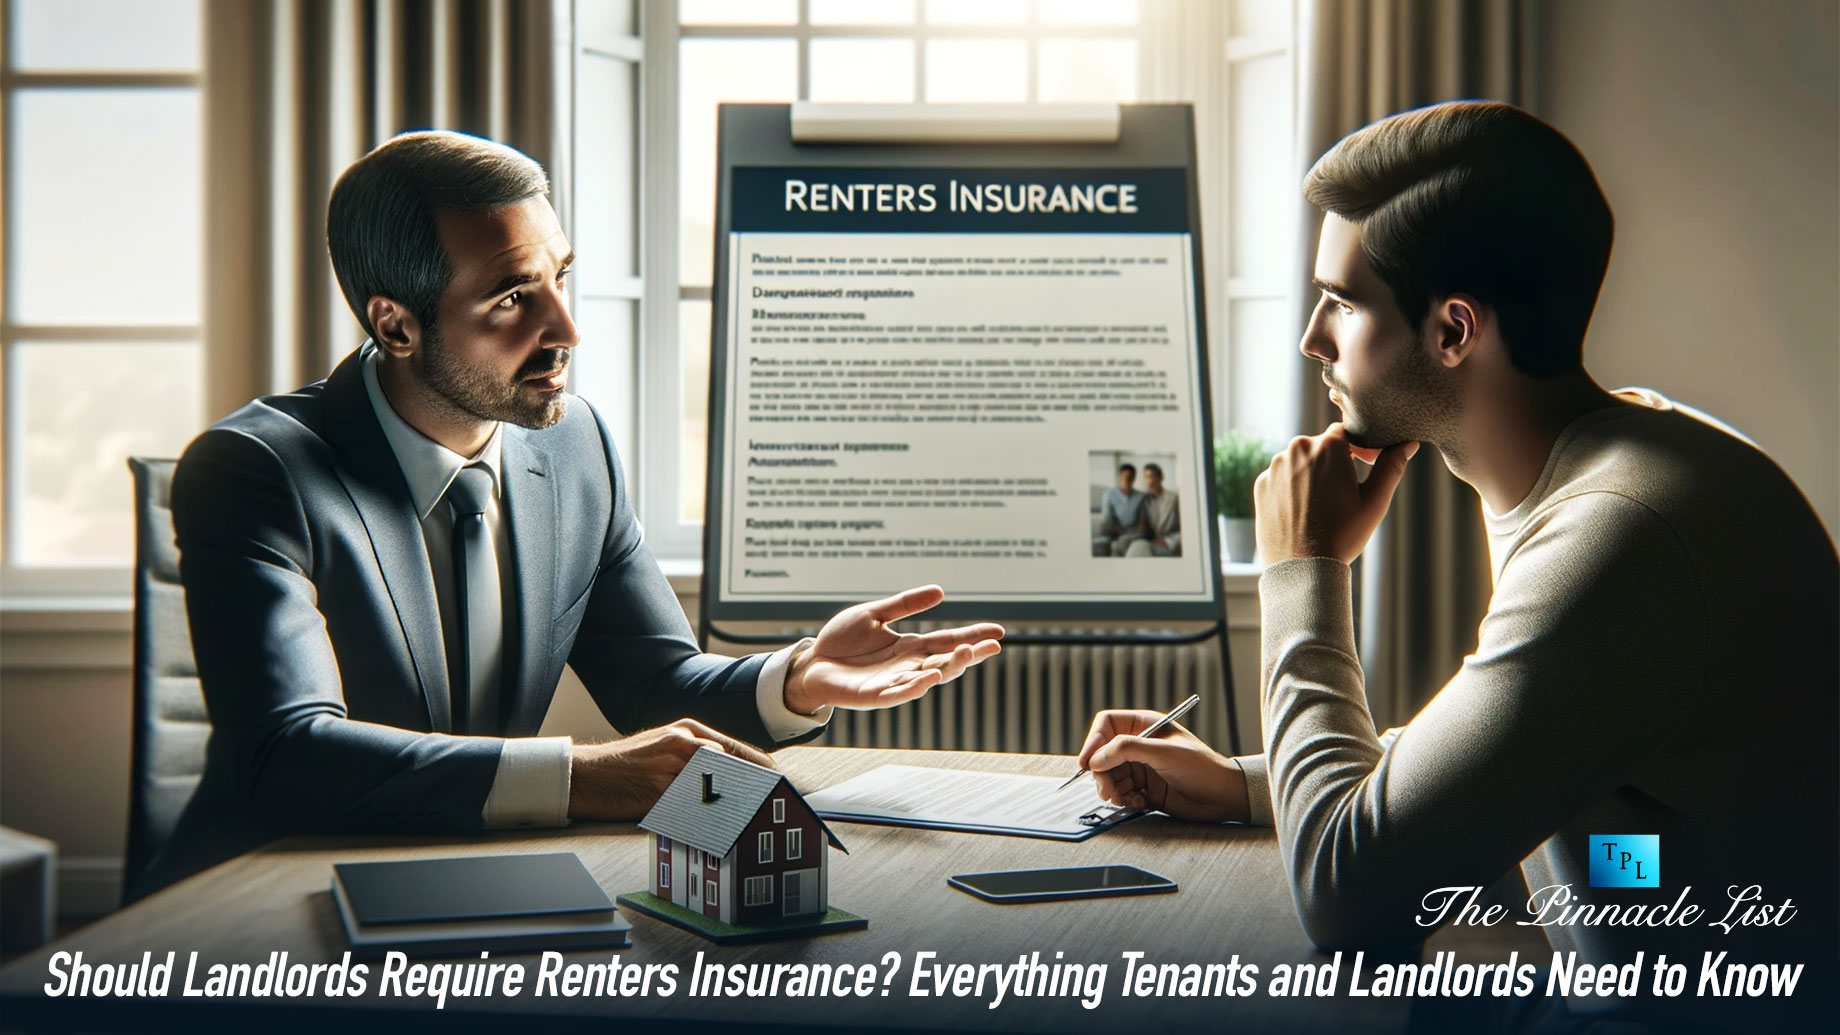 Should Landlords Require Renters Insurance? Everything Tenants and Landlords Need to Know